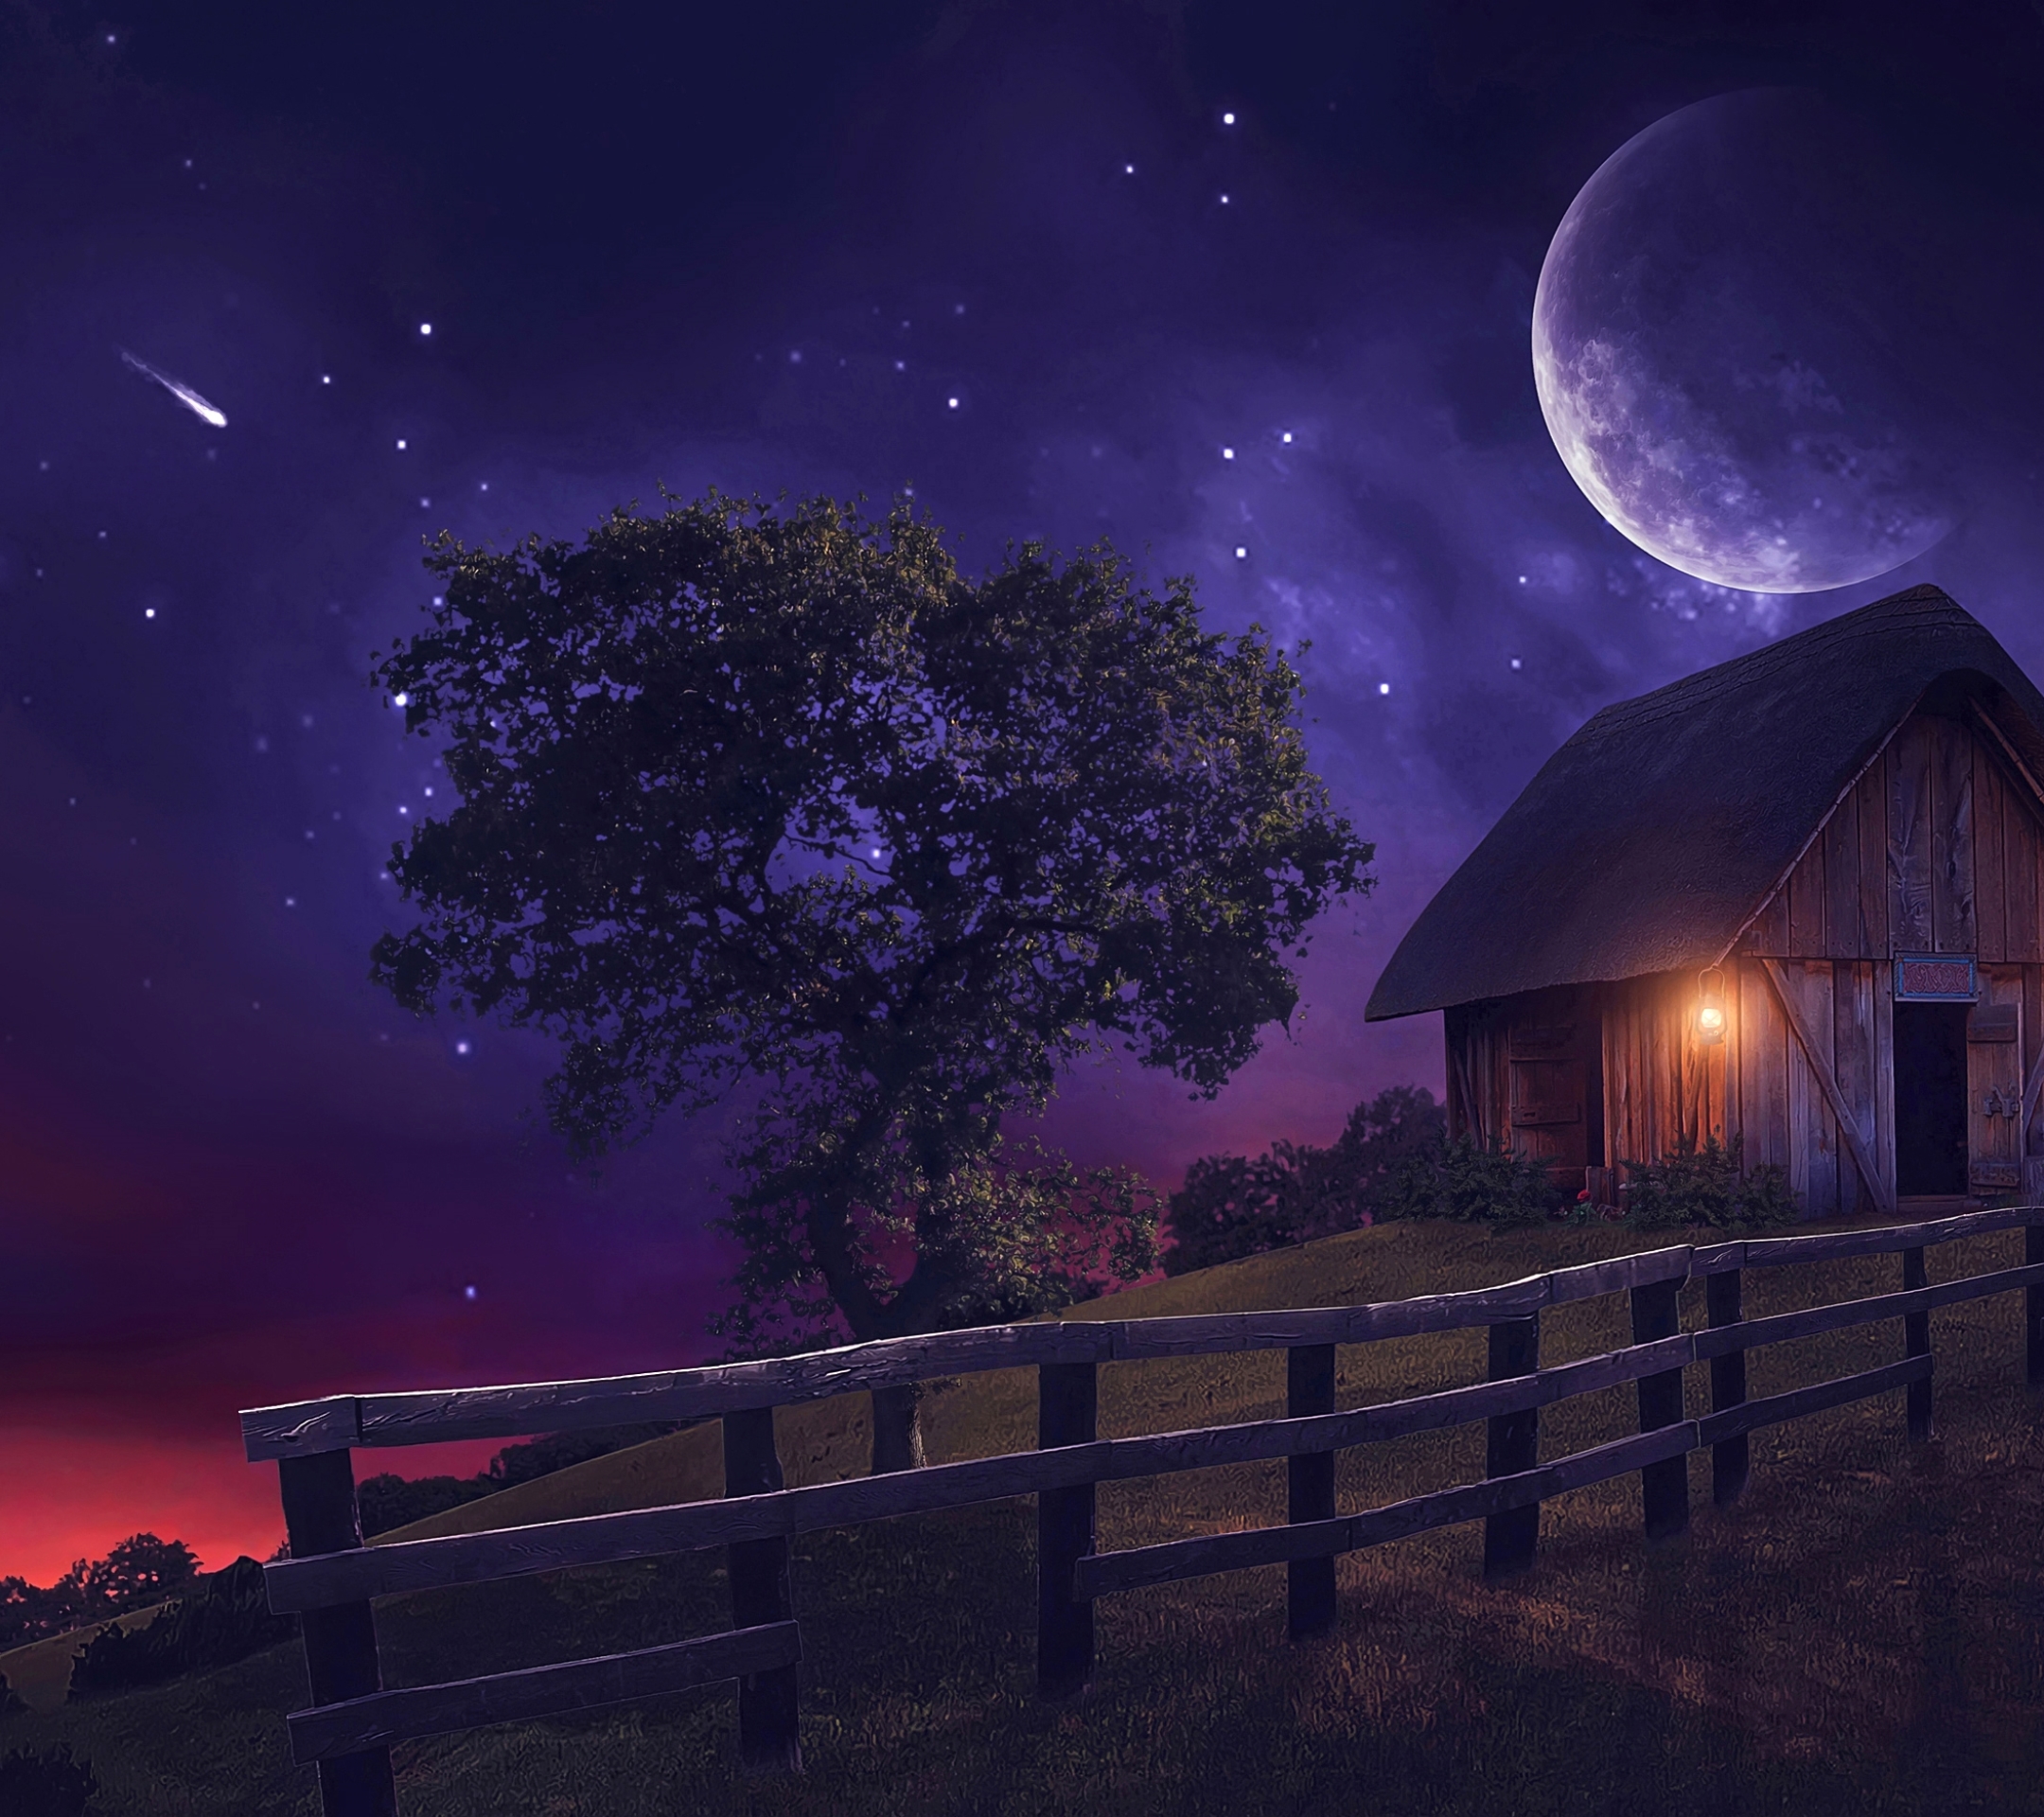 artistic, fantasy, fence, tree, shed, moon, stars